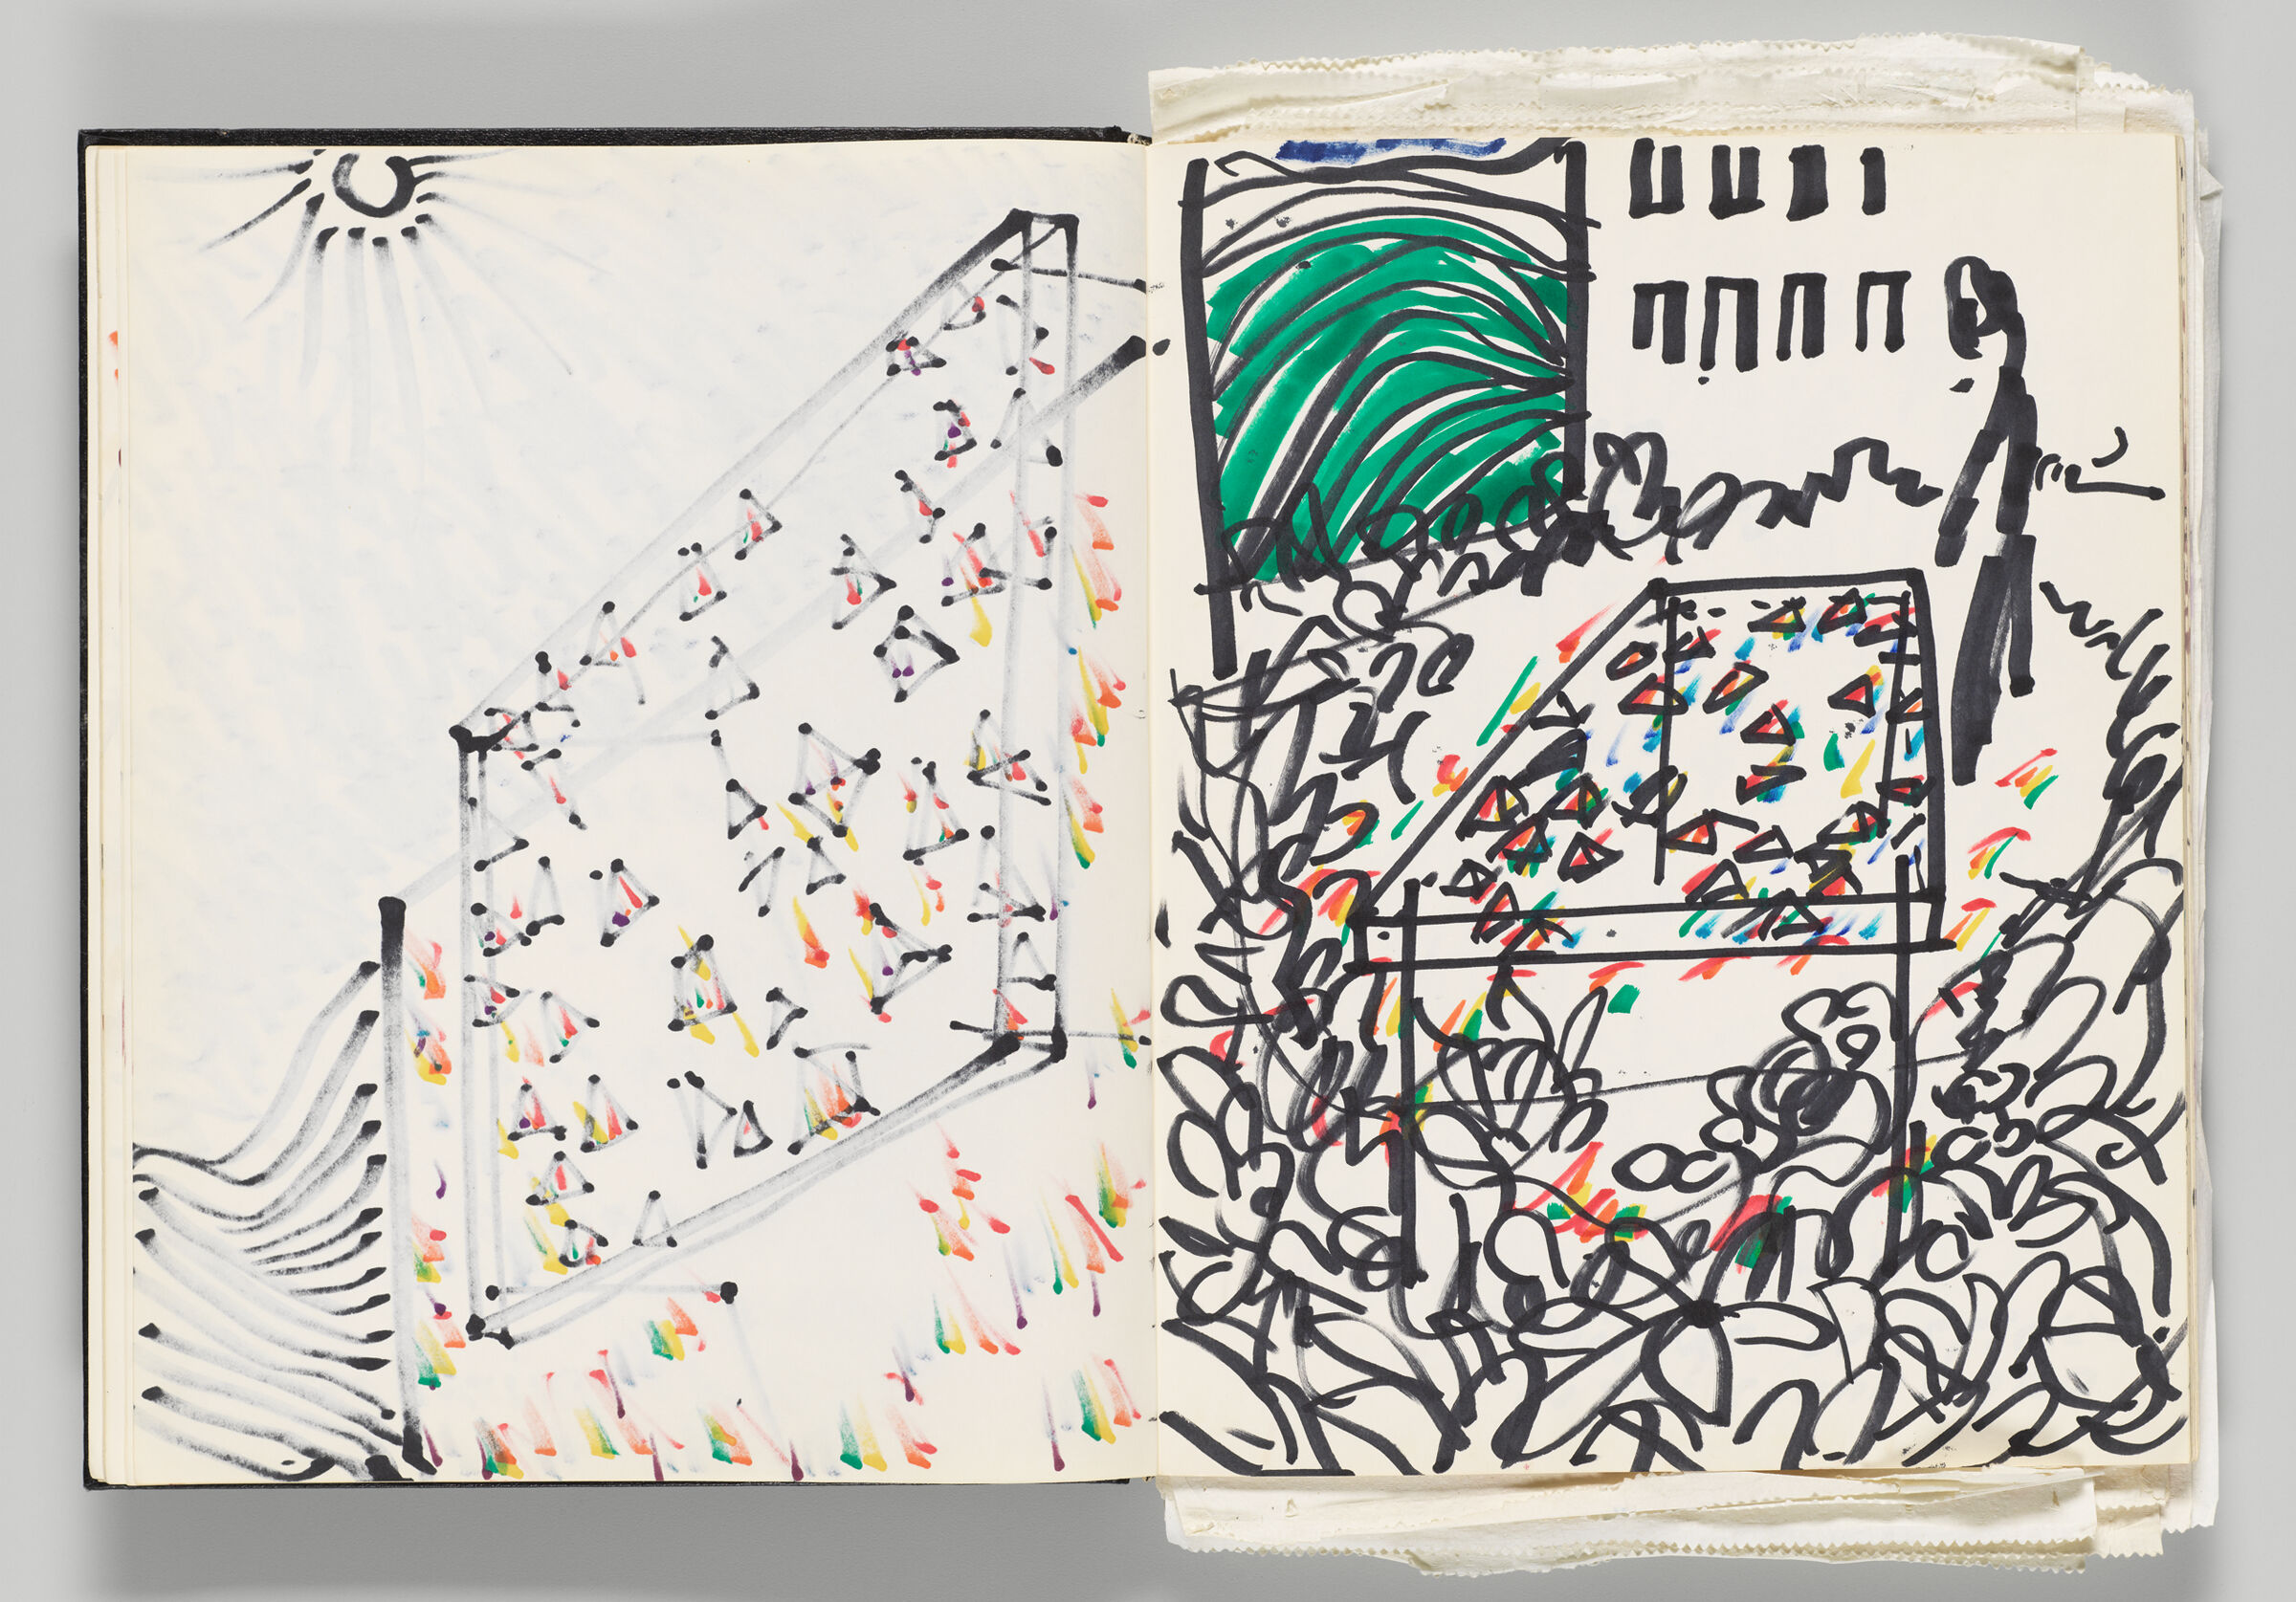 Untitled (Bleed-Through Of Previous Page, Left Page); Untitled (Prisms In Courtyard With Figure, Right Page)